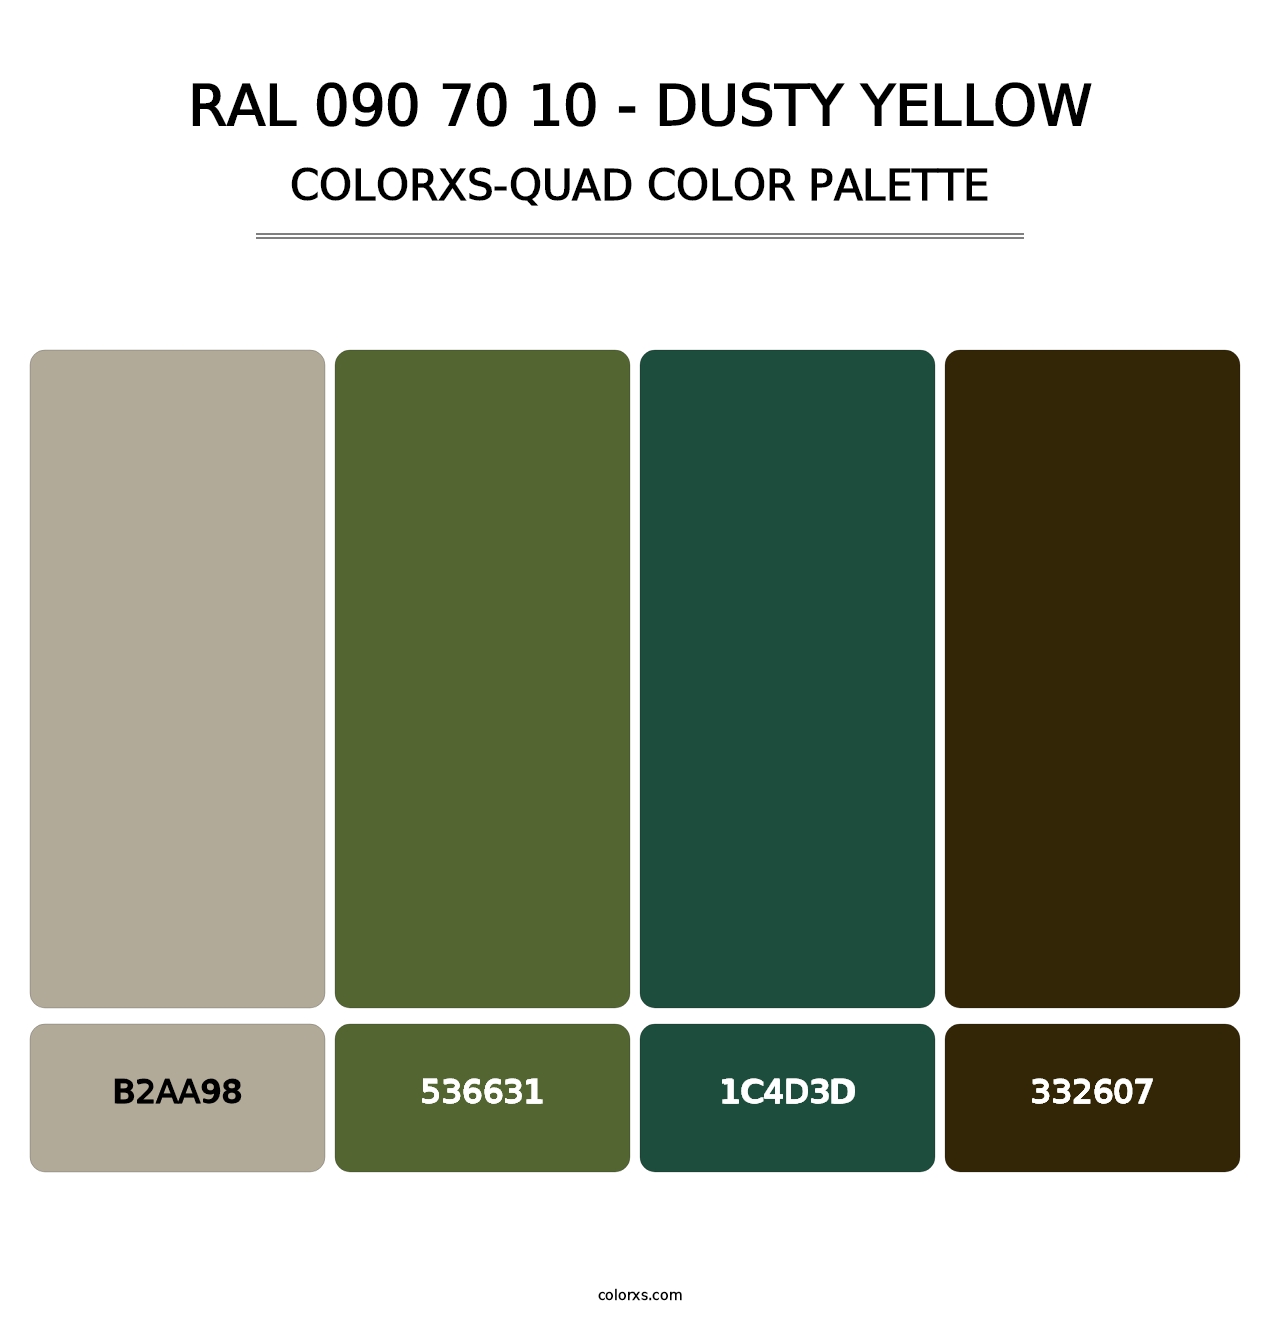 RAL 090 70 10 - Dusty Yellow - Colorxs Quad Palette